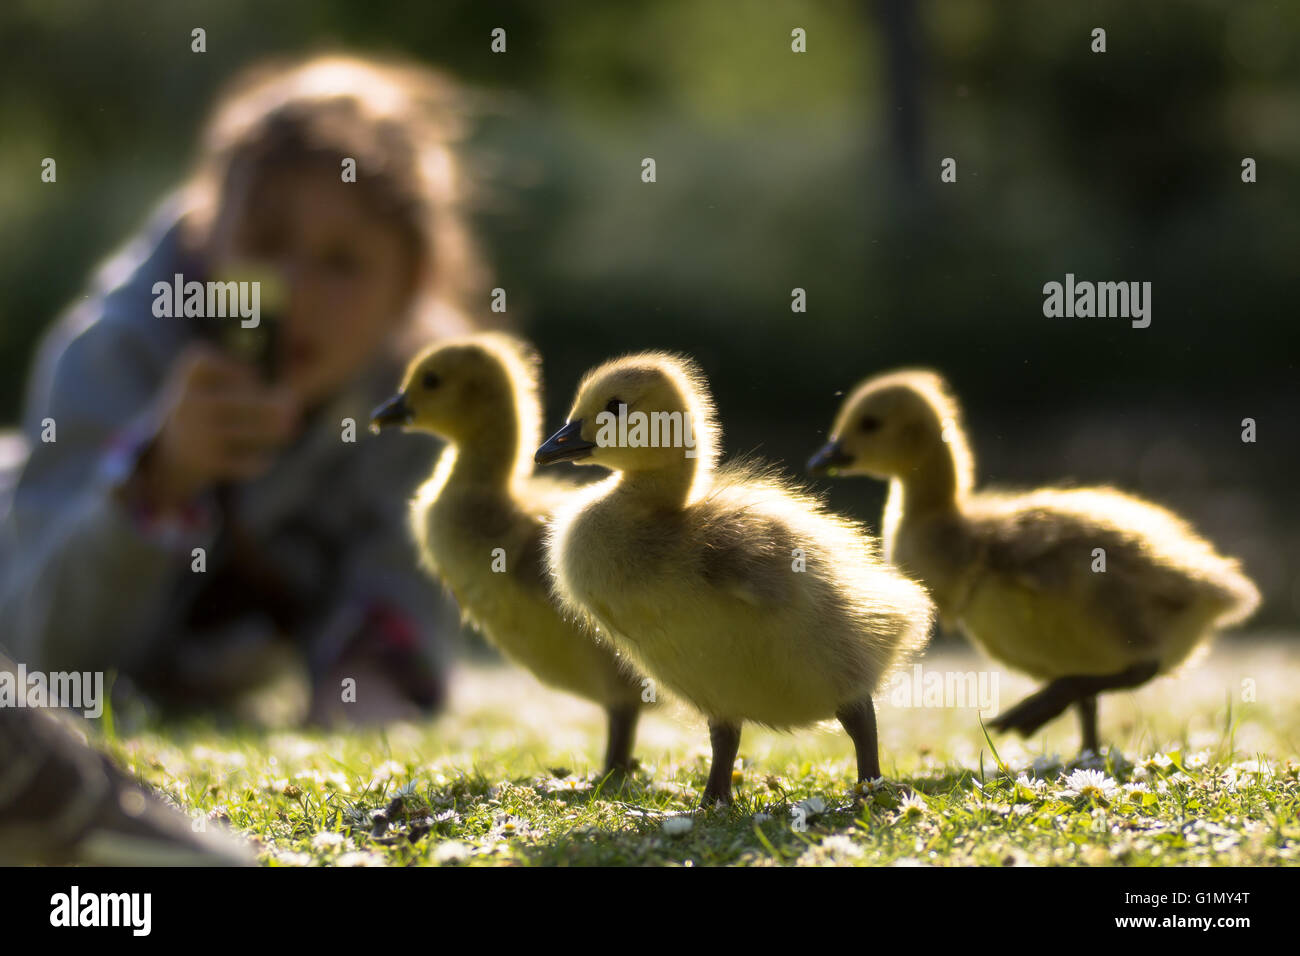 Canada goose (Branta canadensis) goslings being photographed Young chicks in foreground with child using phone to take photo Stock Photo